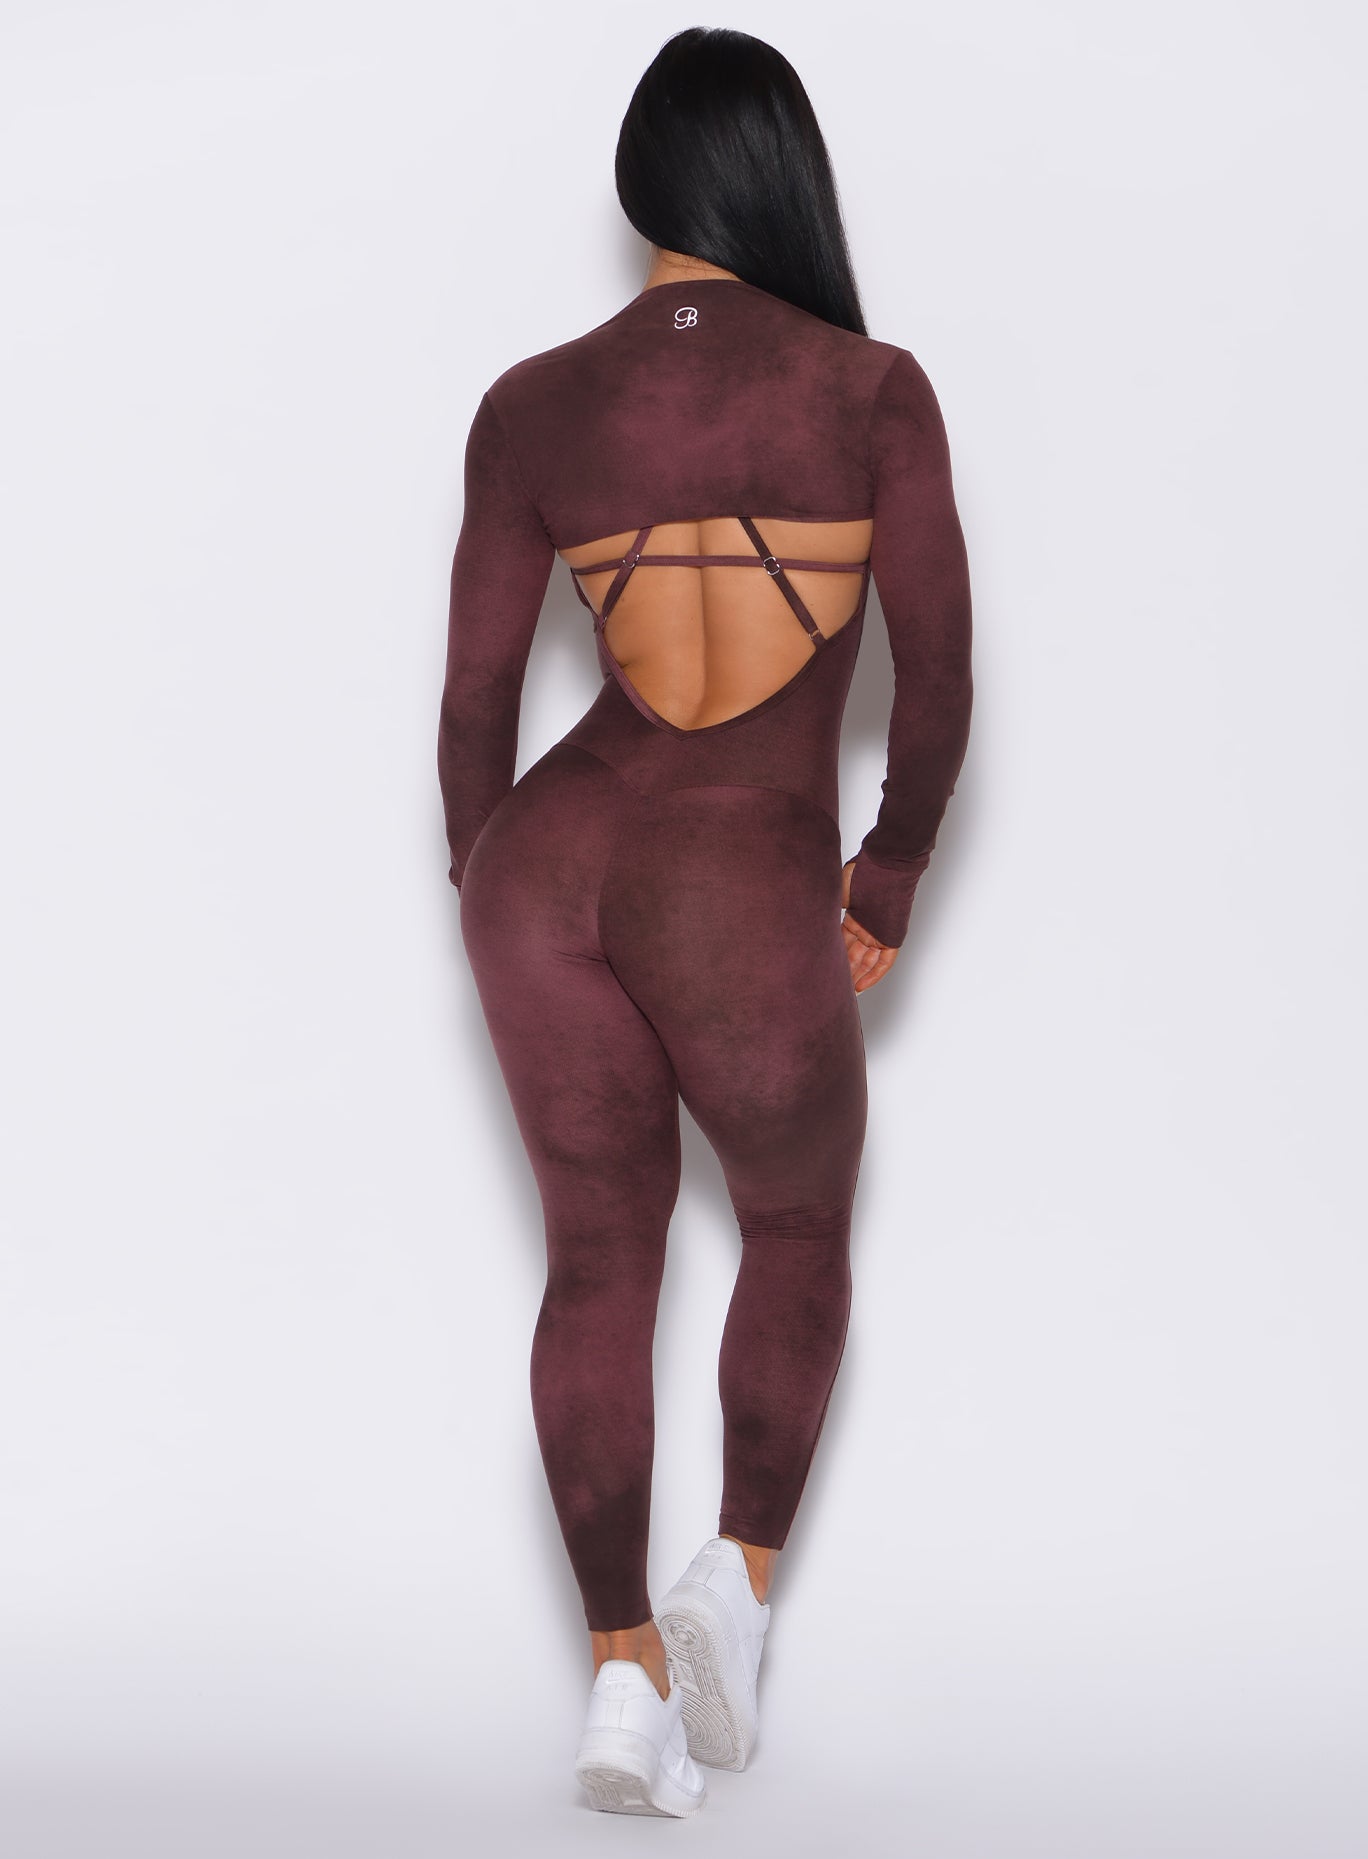 Back profile view of a model in our Sculpt Bodysuit in Vintage Port color along with the matching shape shrug